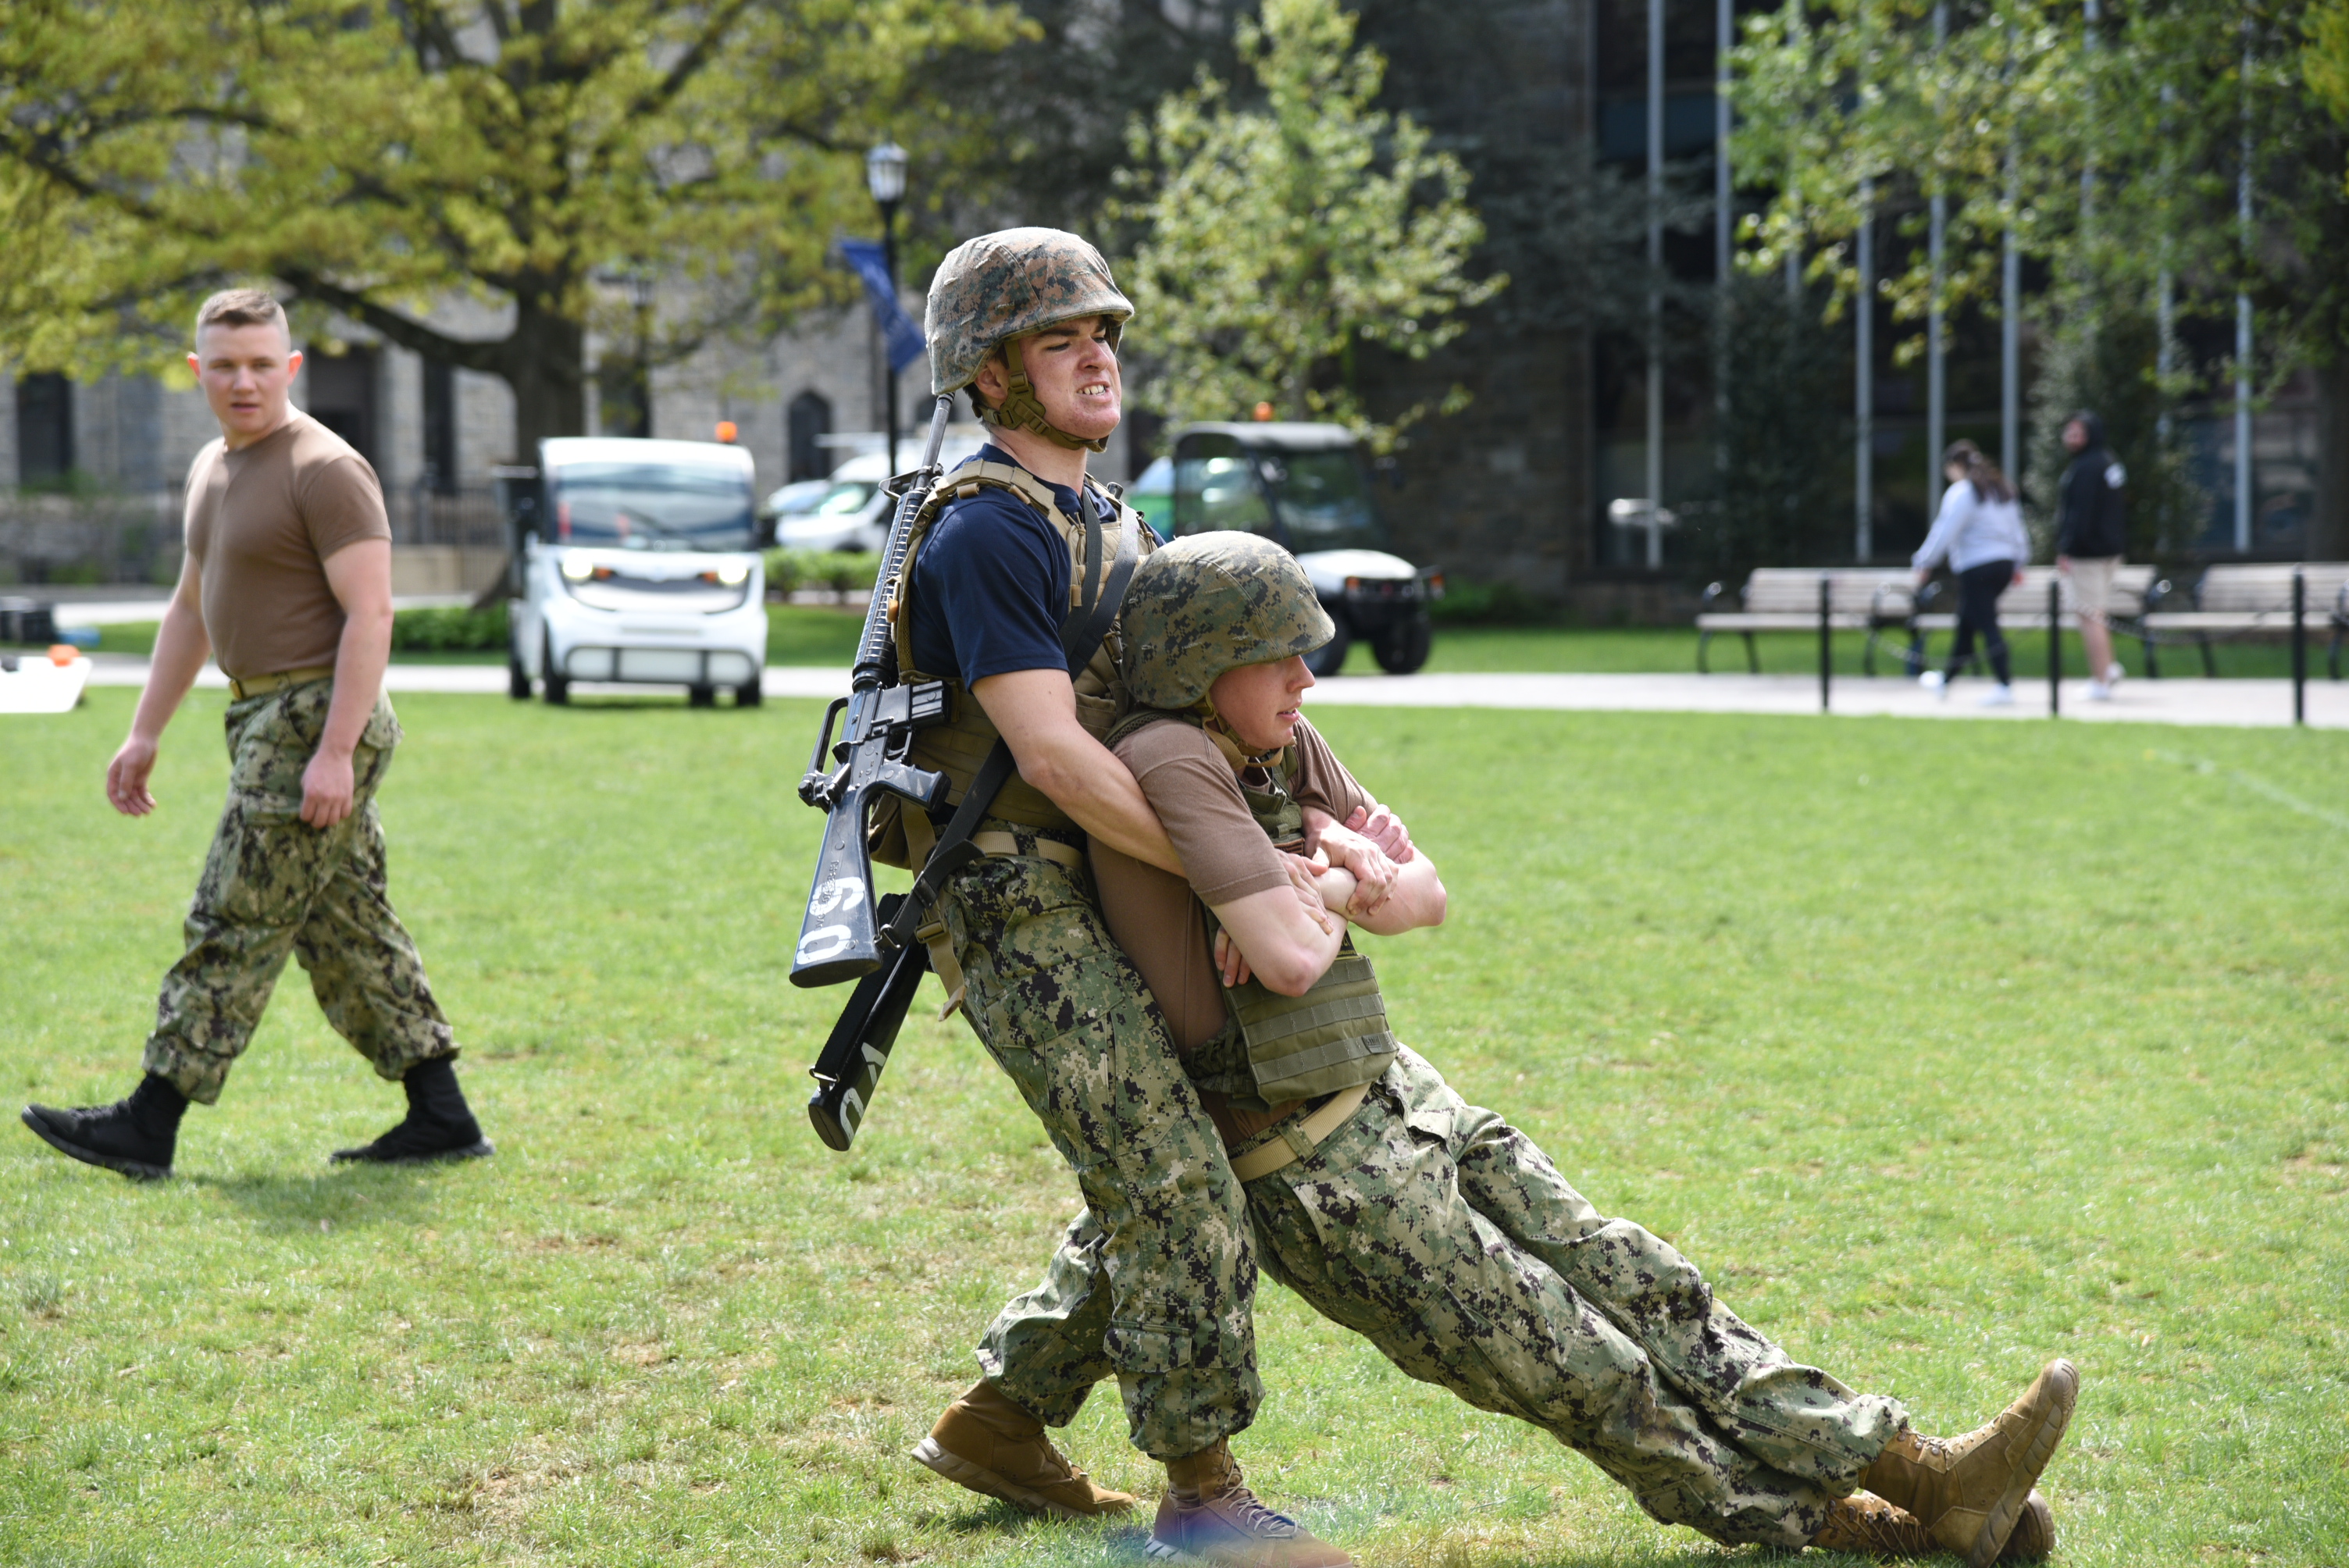 two people in military uniforms, one dragging the other